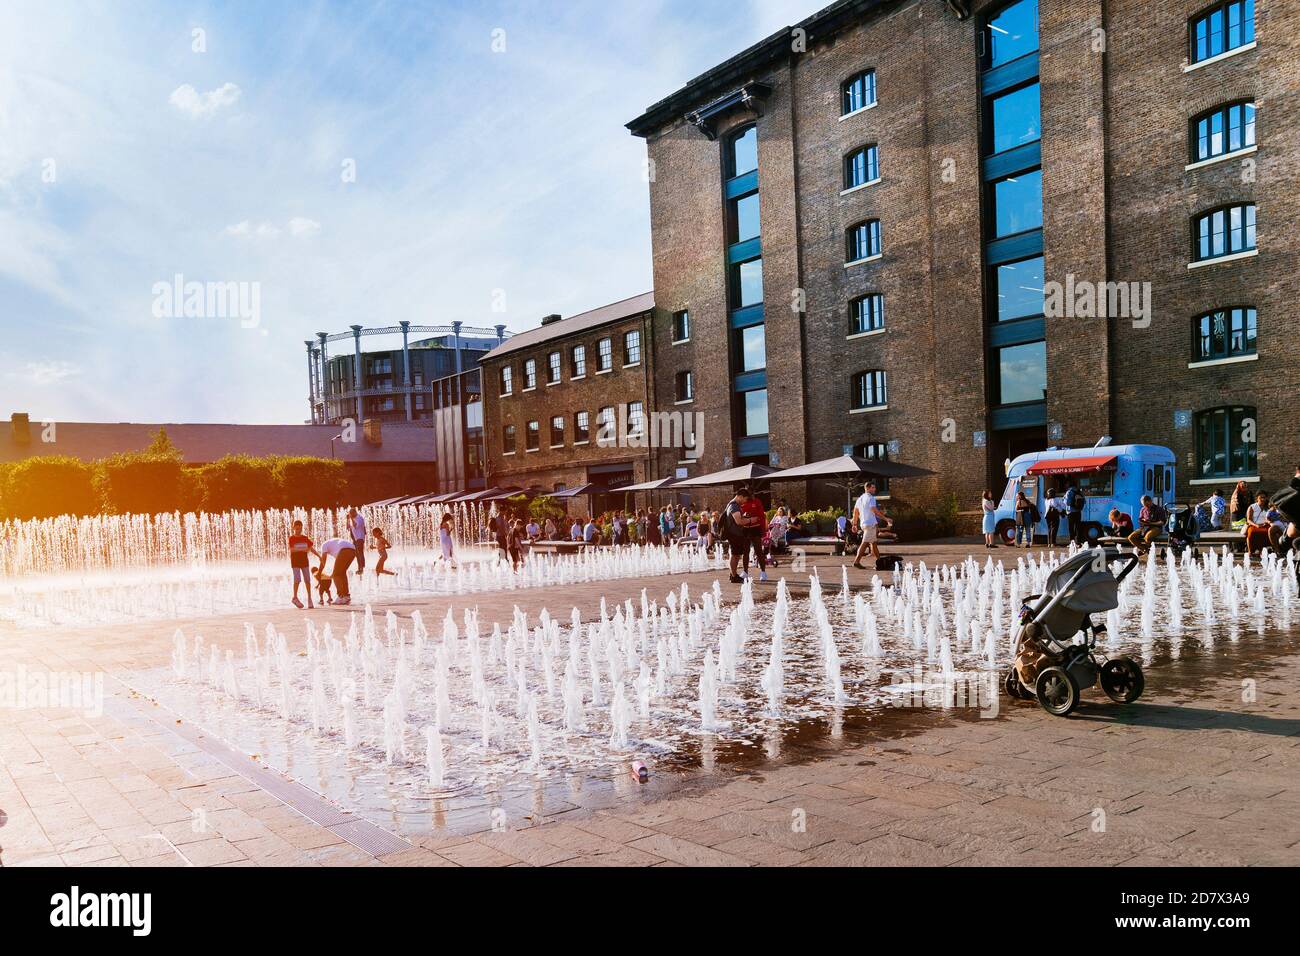 King's Cross London, UK, July 12, 2019: Granary Square People enjoy  outdoor, water fountain Stock Photo